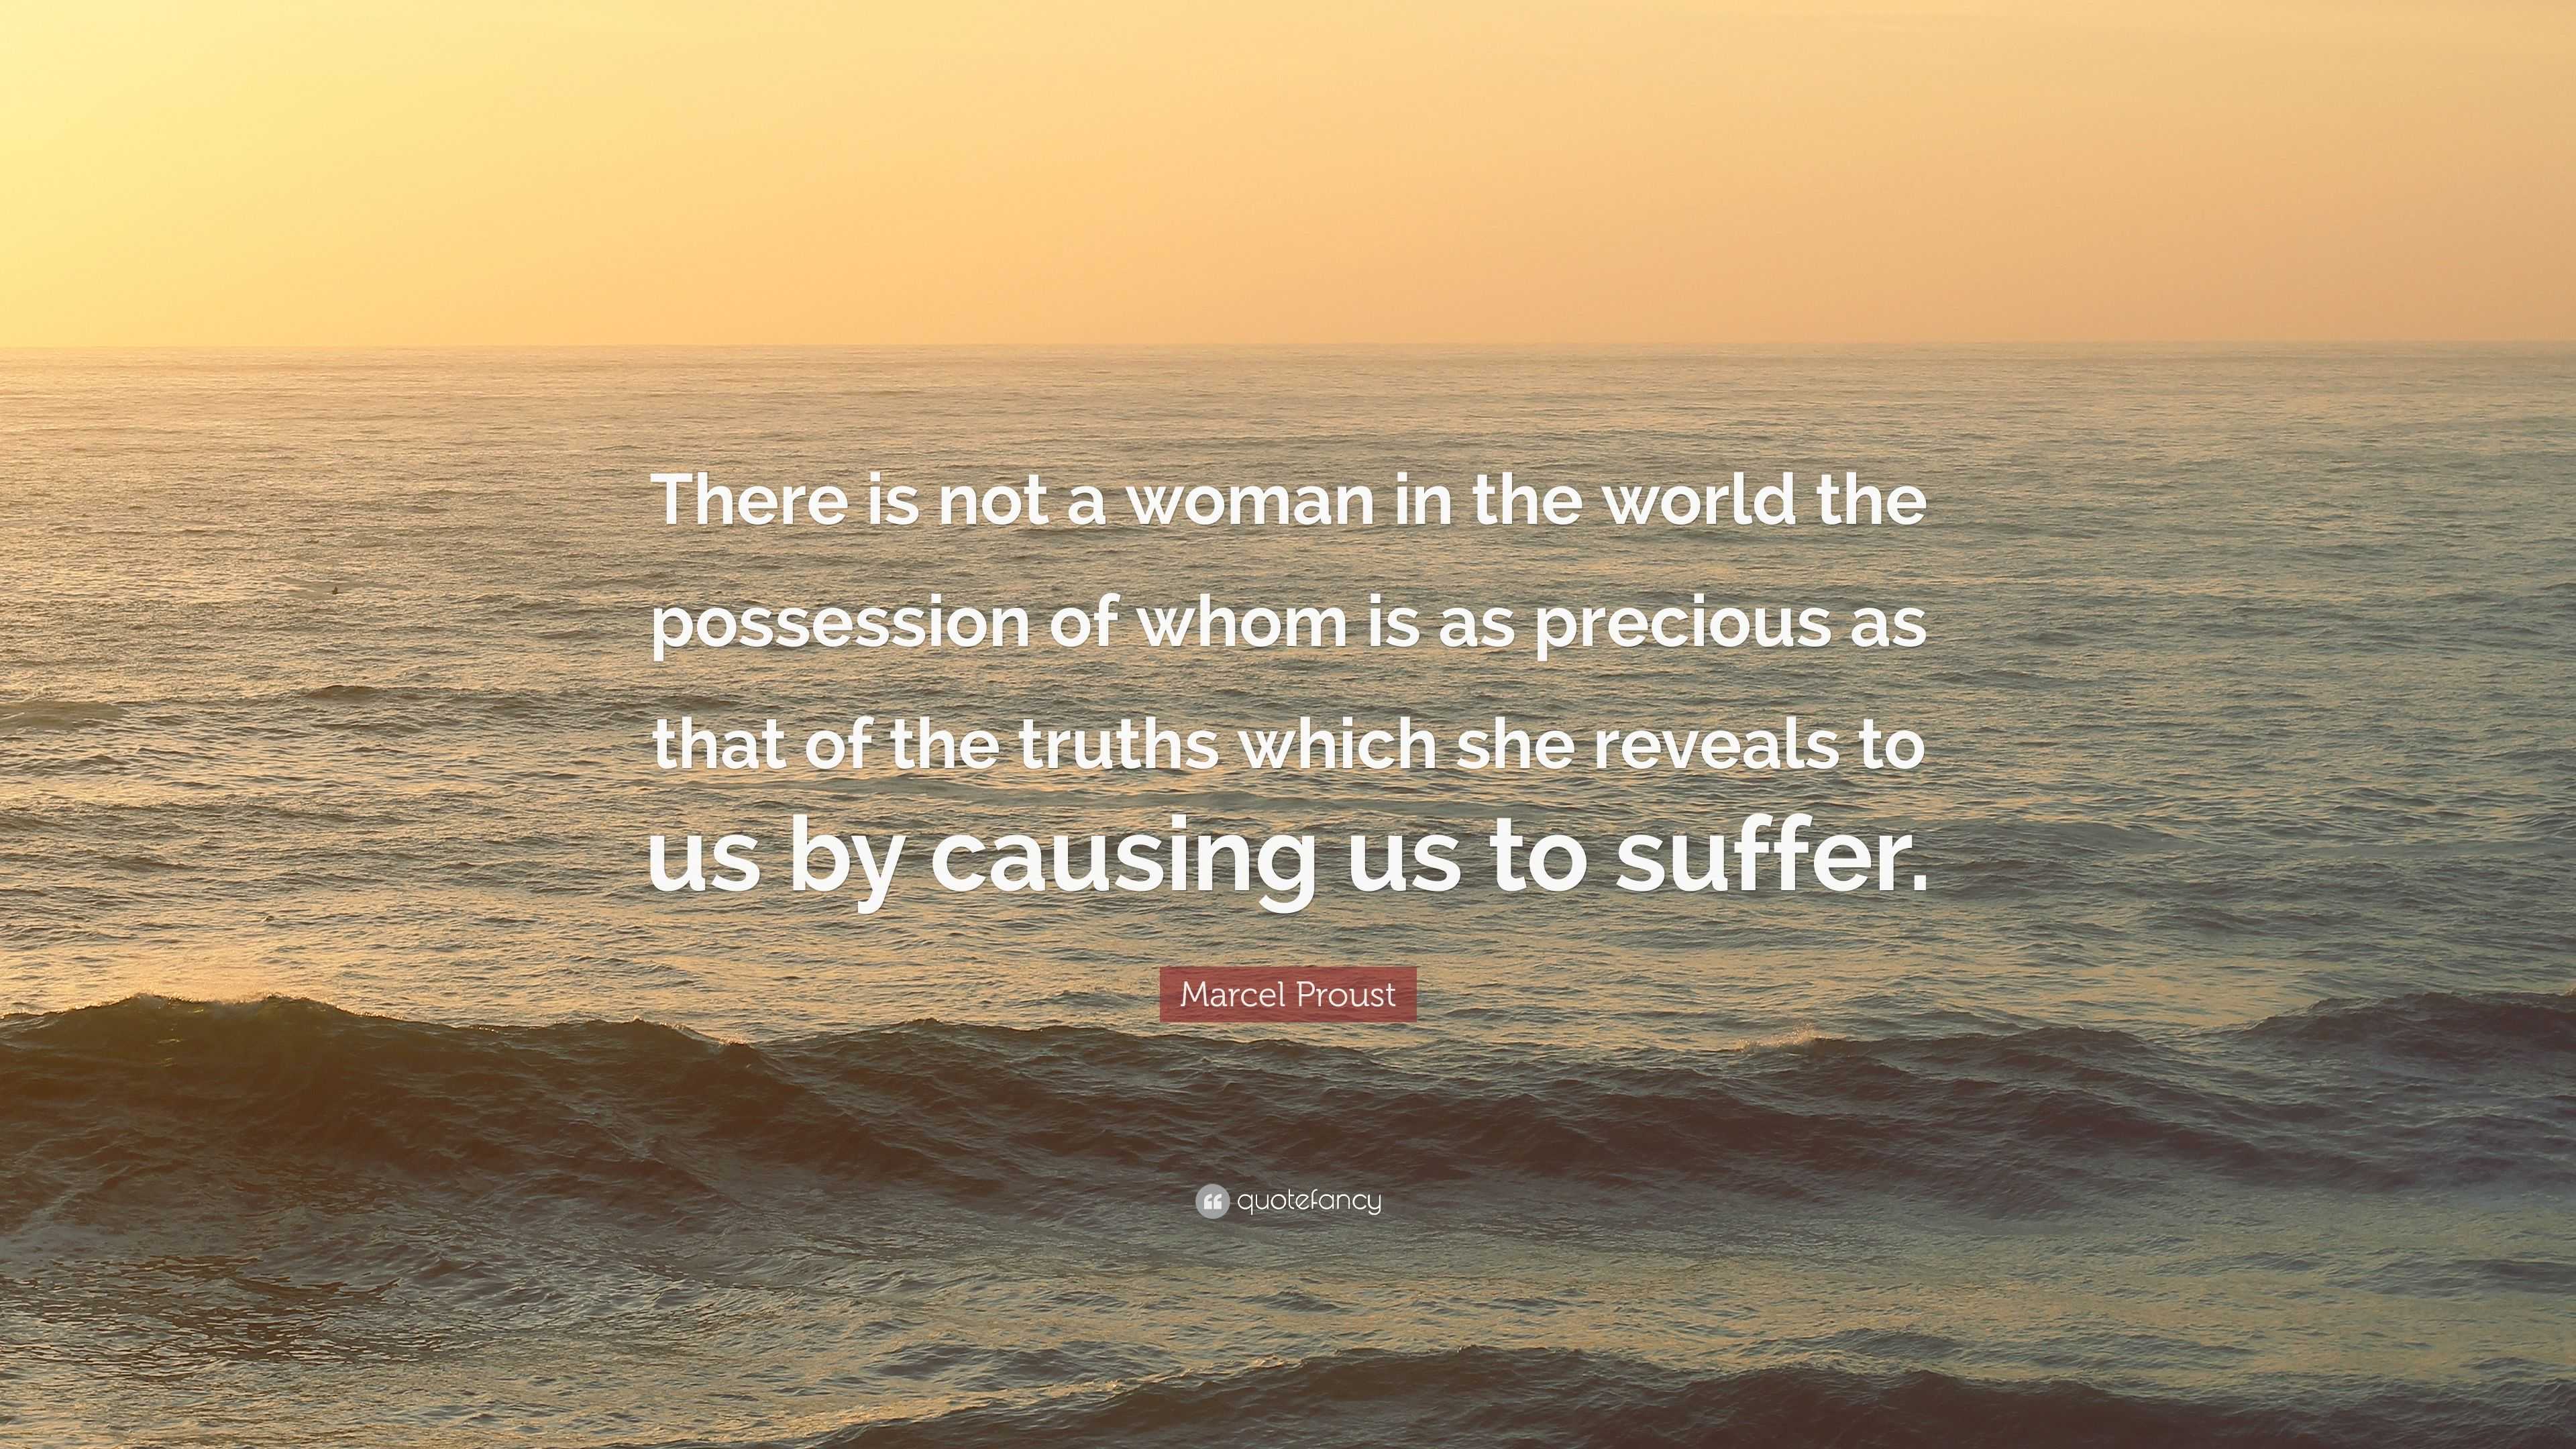 Marcel Proust Quote: “There is not a woman in the world the 